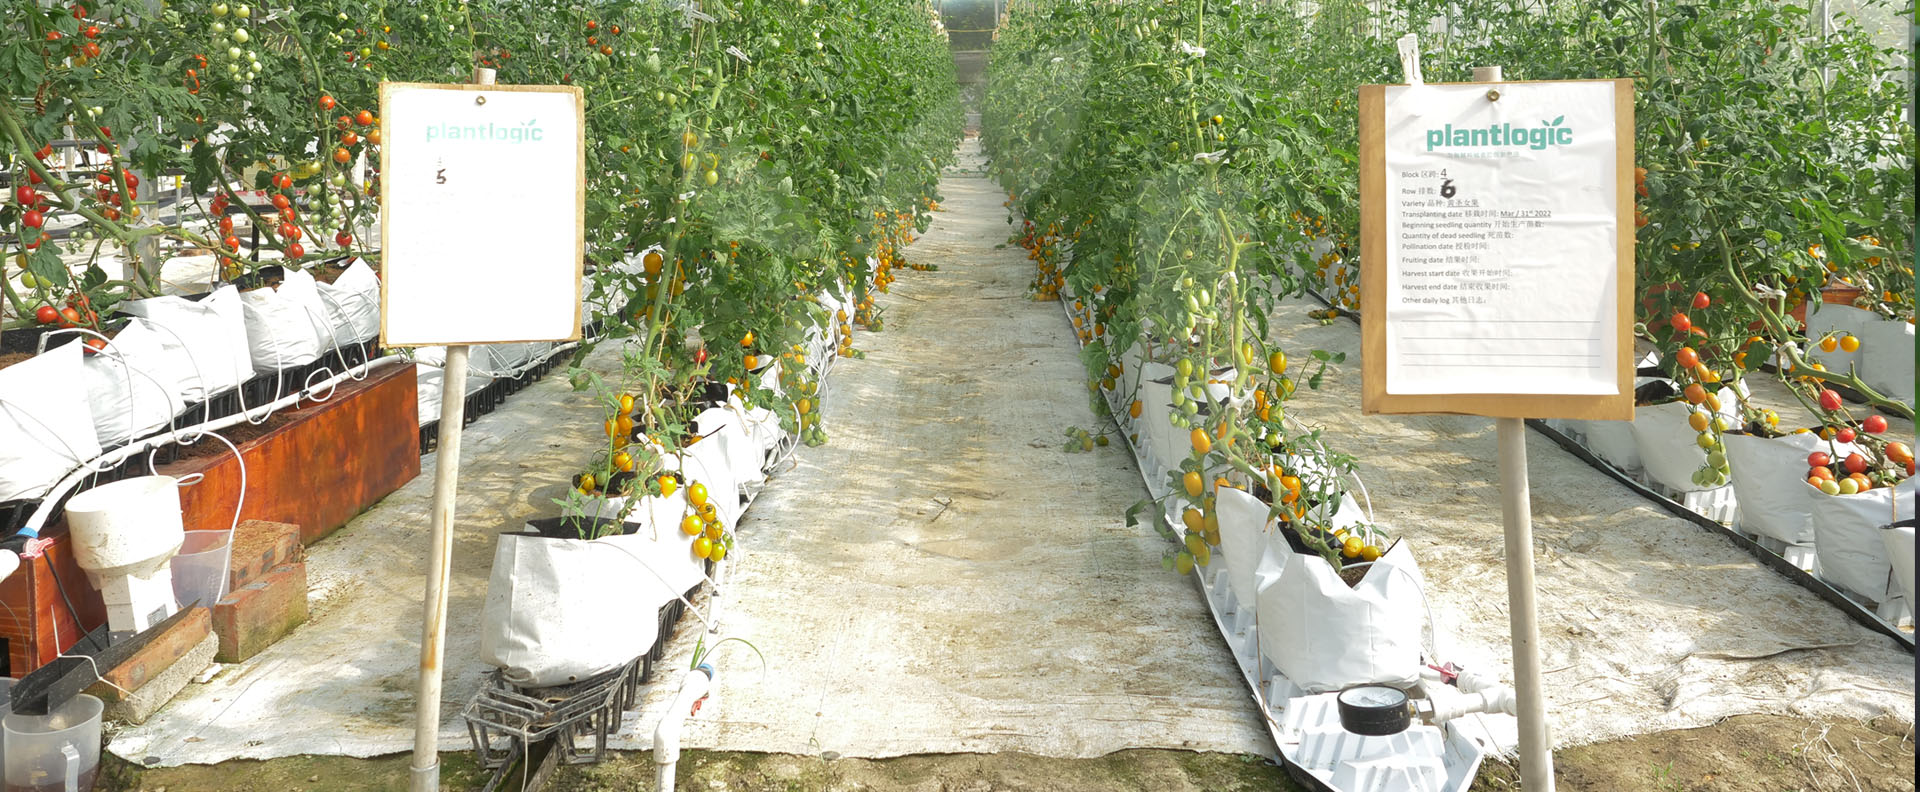 Maximize your tomato and vegetable production in grow bags with Plantlogic drainage collection bases